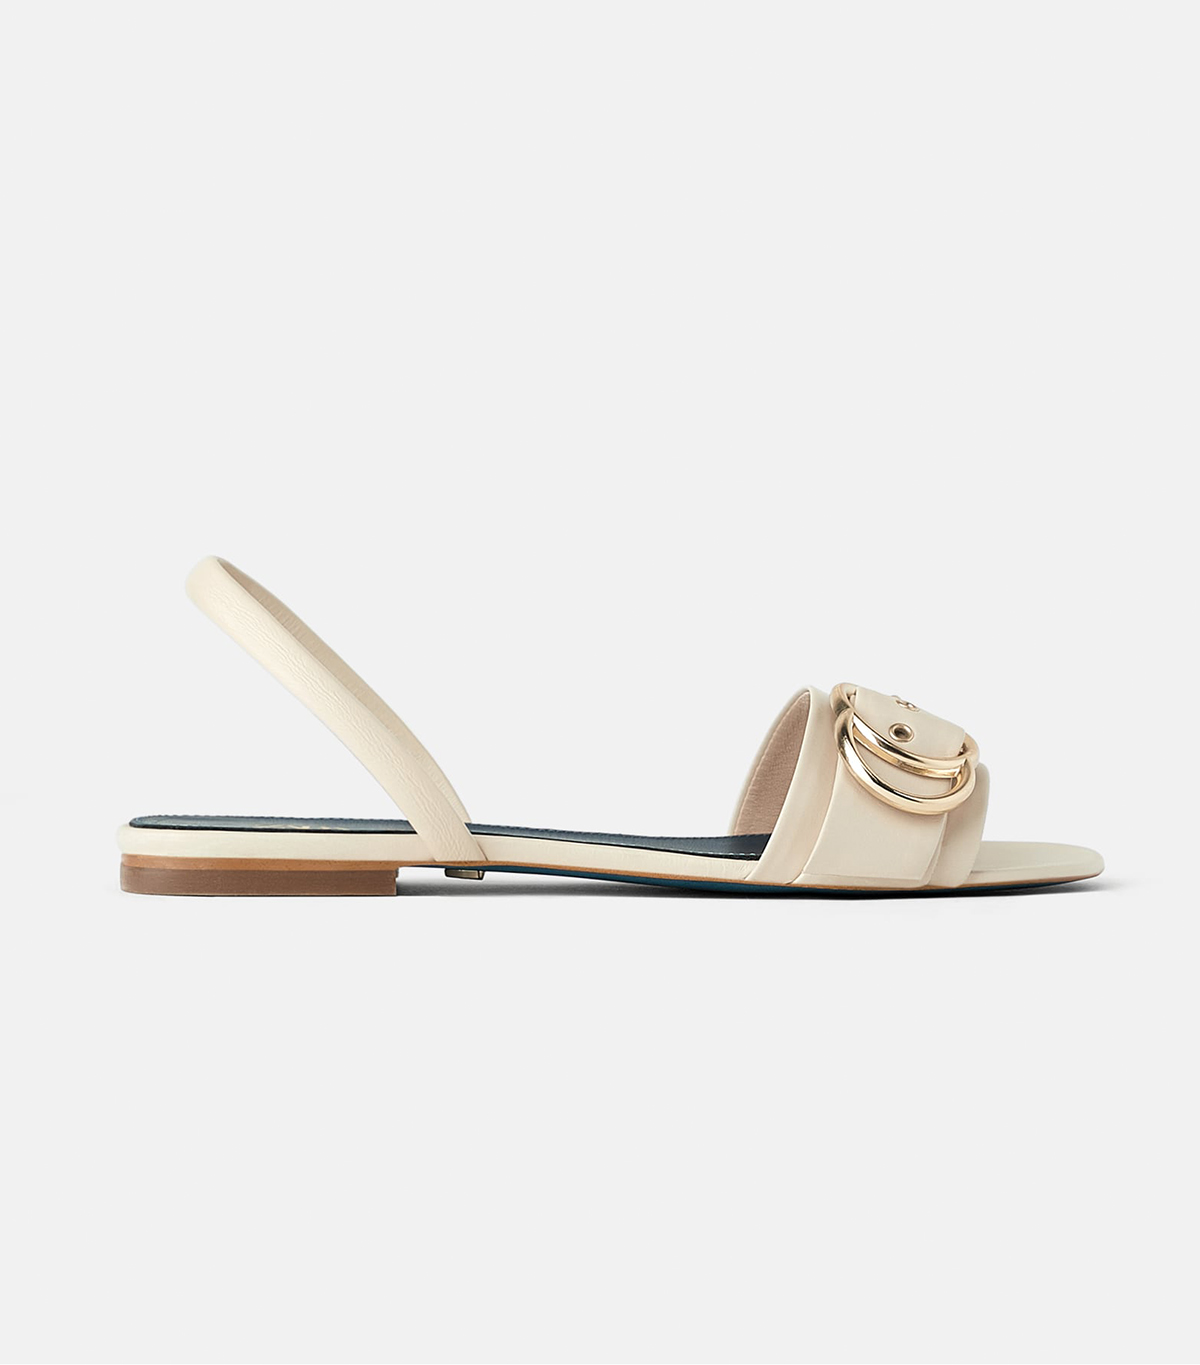 This Random Sandal Trend Is Blowing Up at Zara | Who What Wear